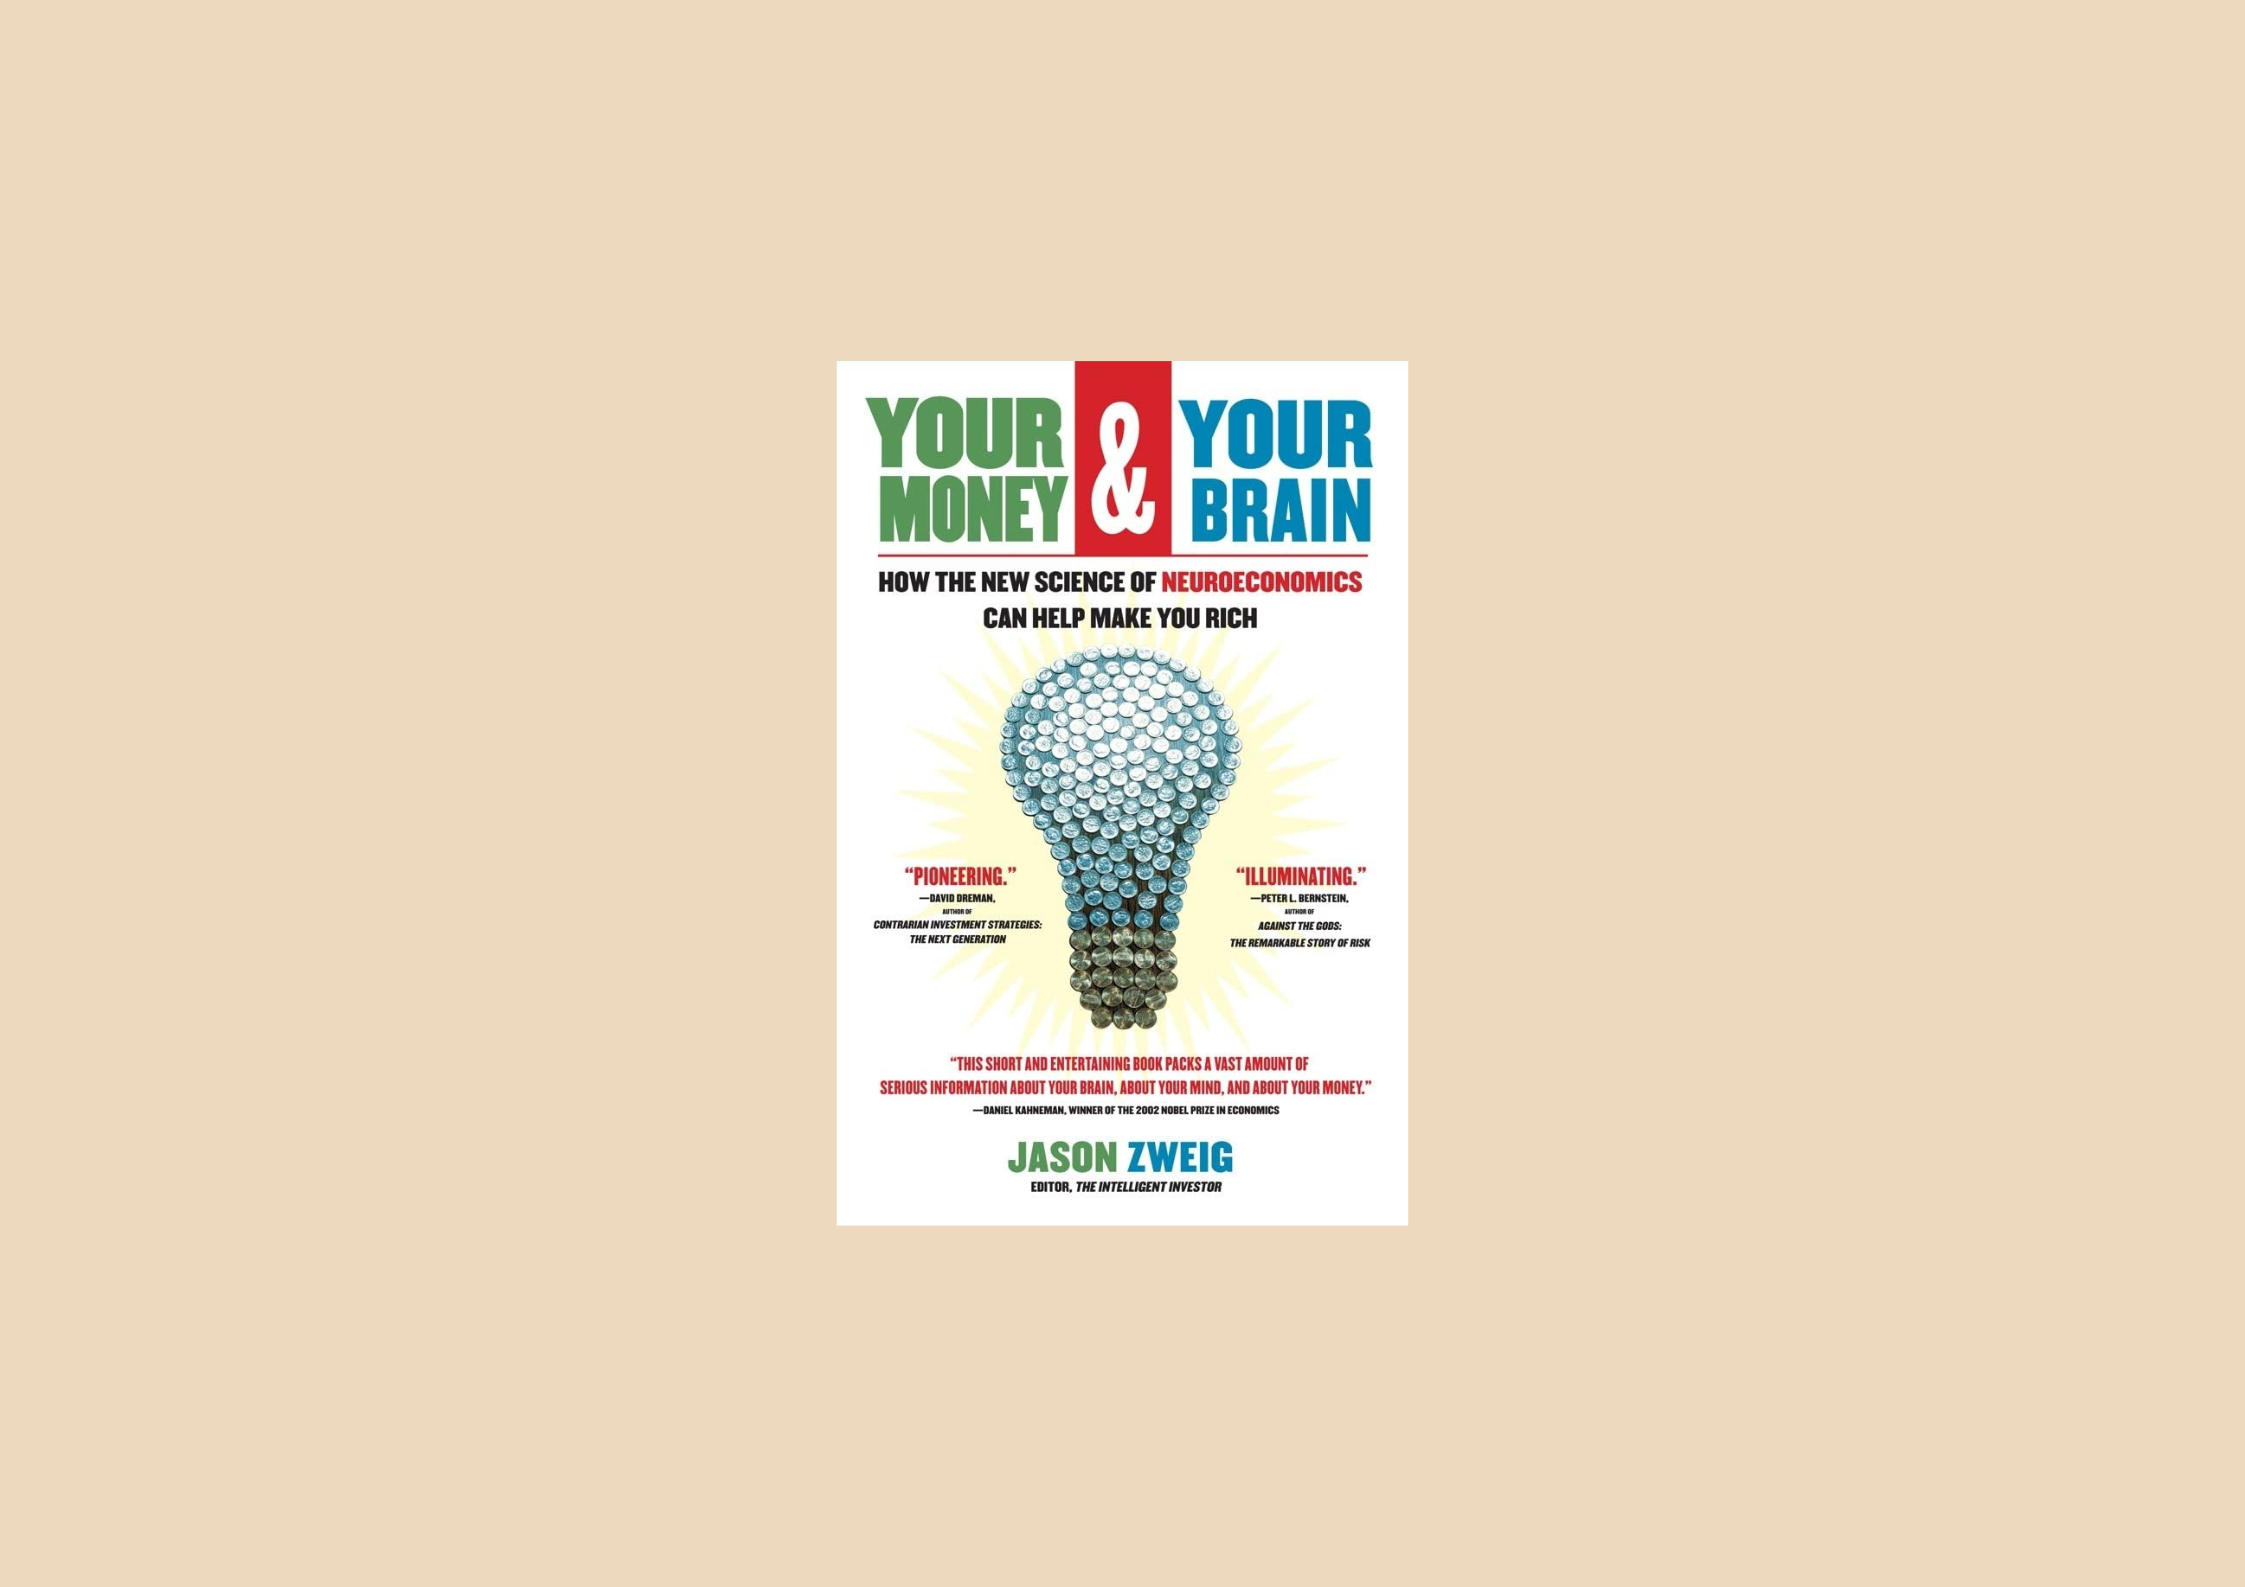 lessons from your money & your brain